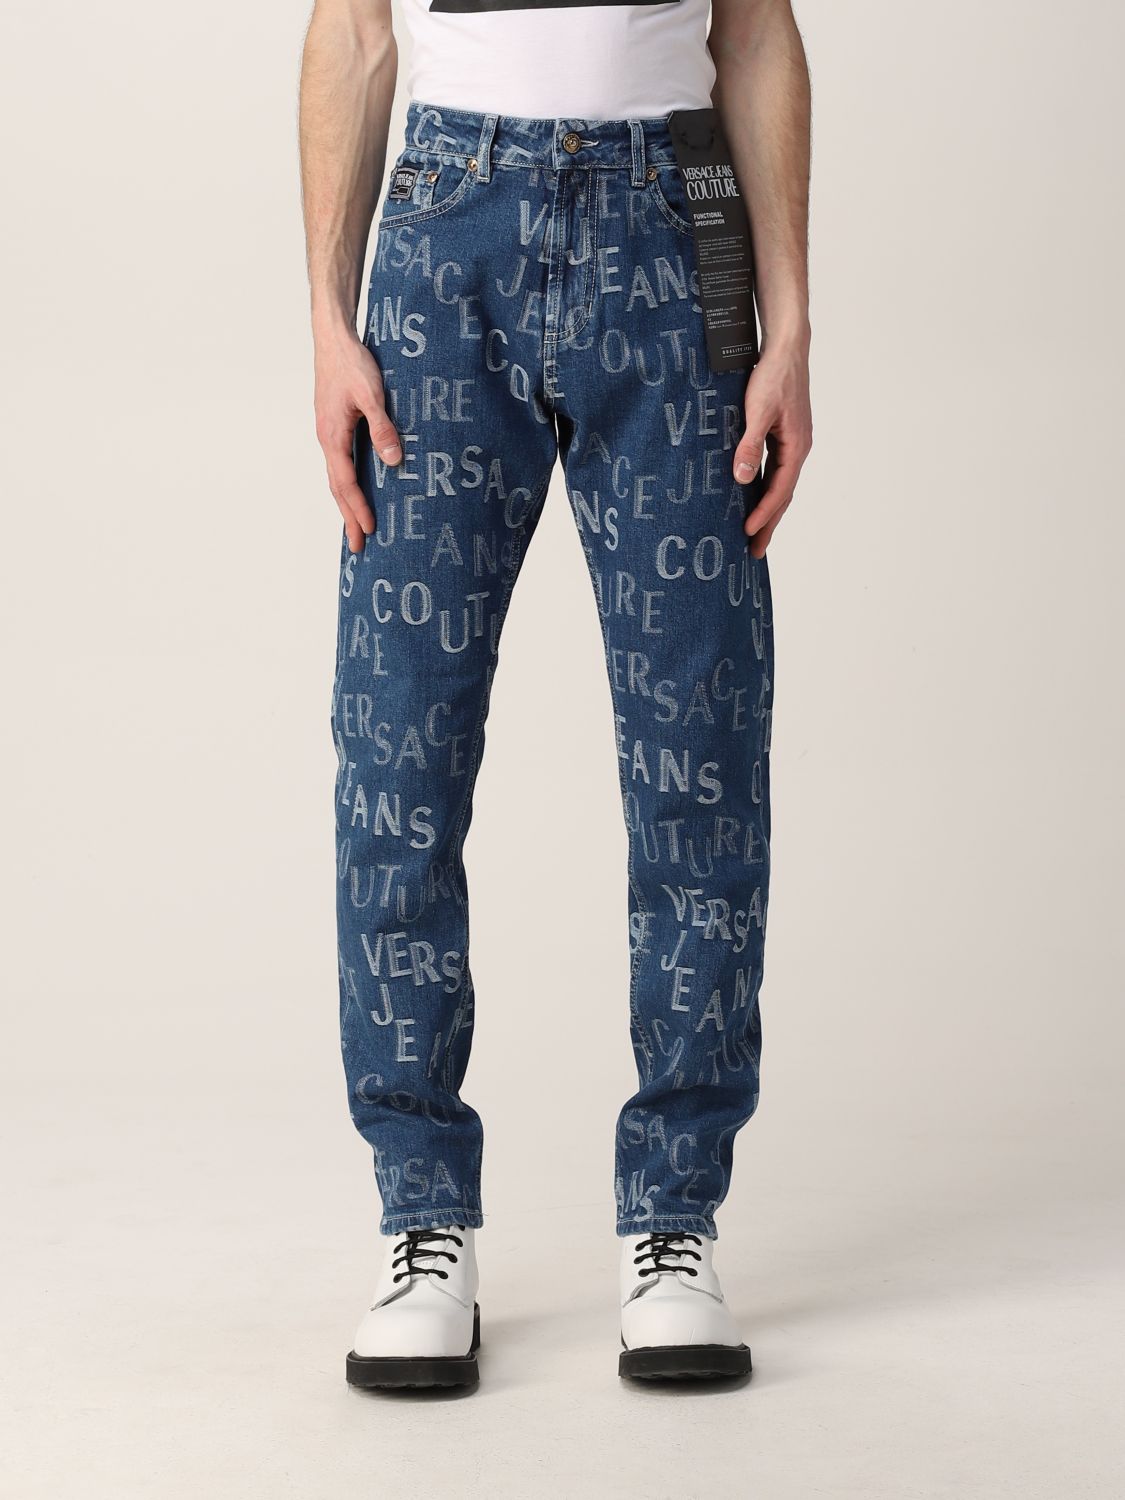 VERSACE JEANS COUTURE: in denim with all over logo - Indigo | Jeans Couture jeans 72GAB5D0DW026SS0 online on